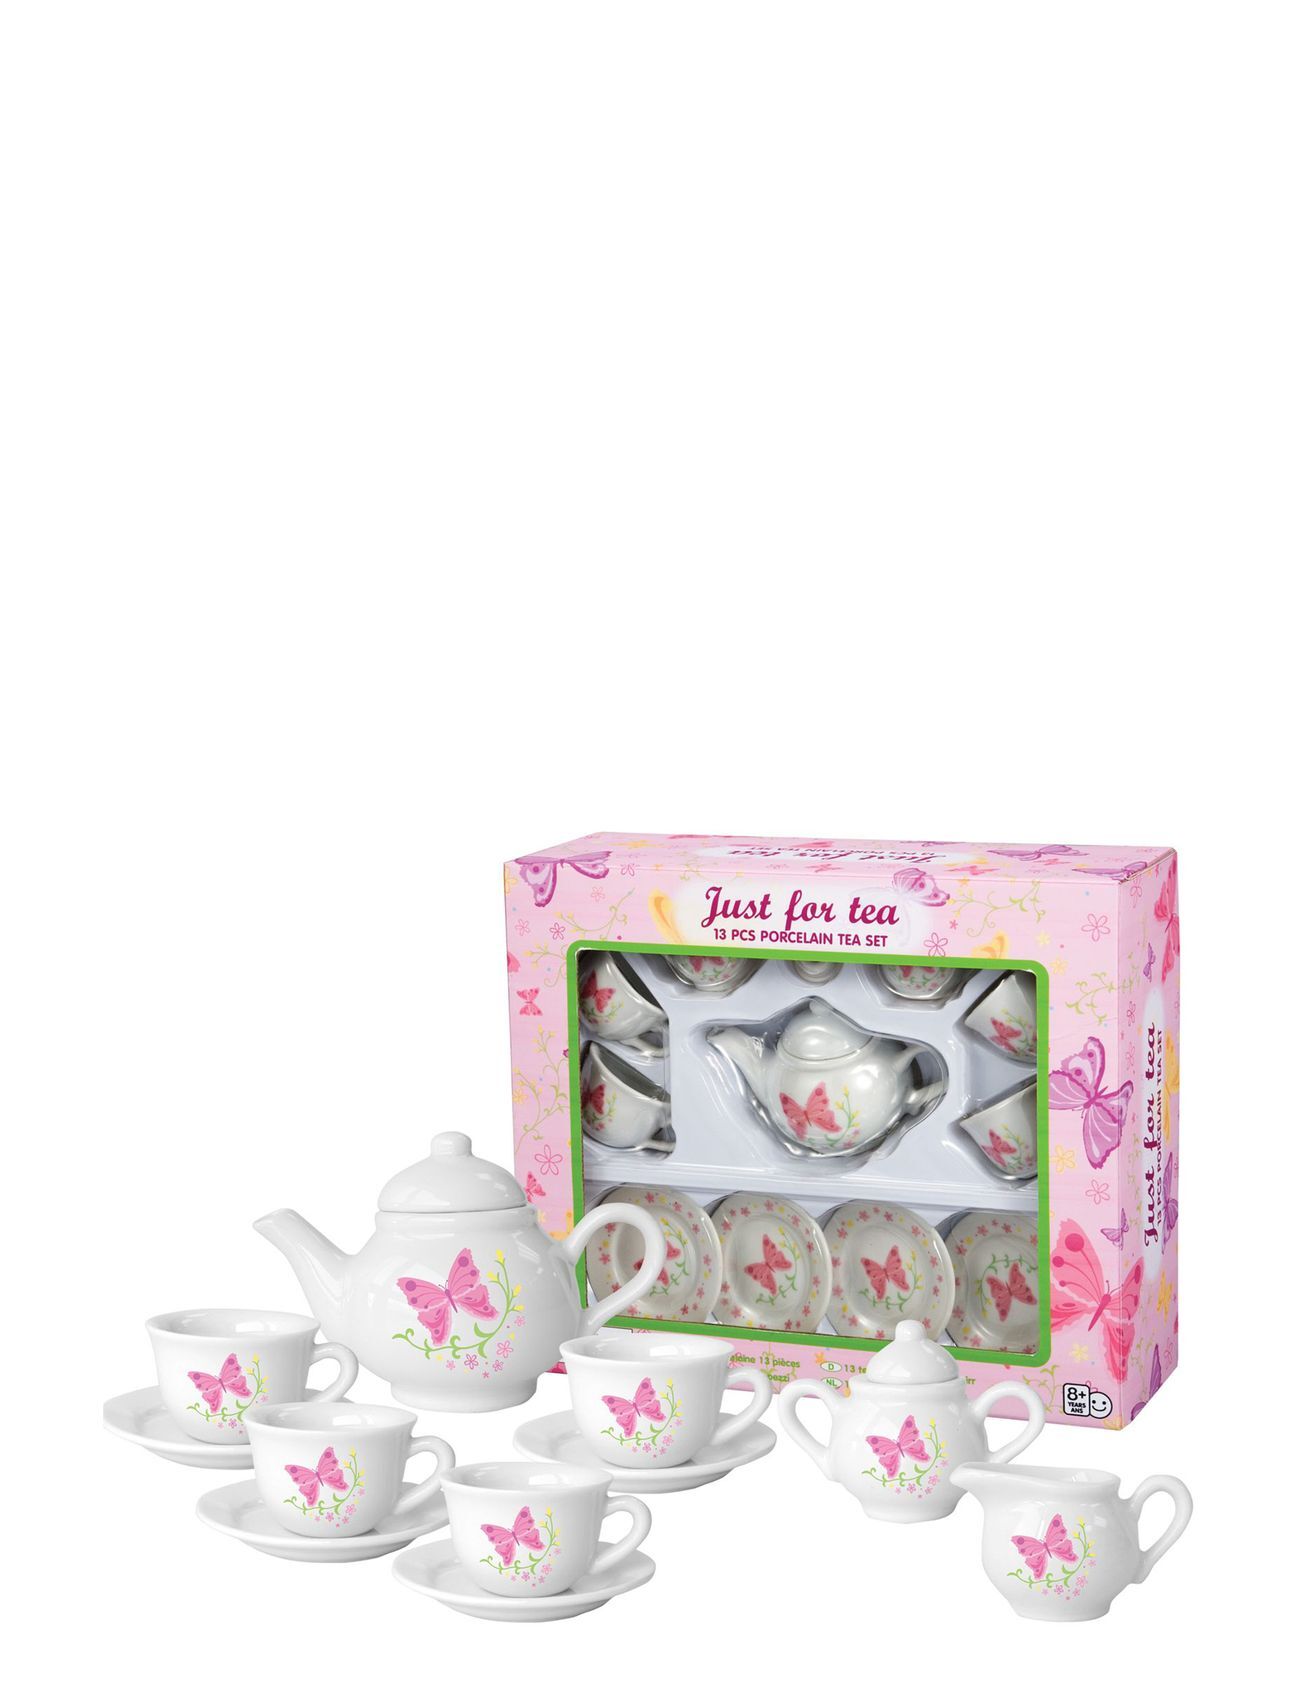 Magni Toys Tea Set "Butterfly" In Porcelain With 13 Parts Toys Toy Kitchen & Accessories Coffee & Tee Sets Rosa Magni Toys